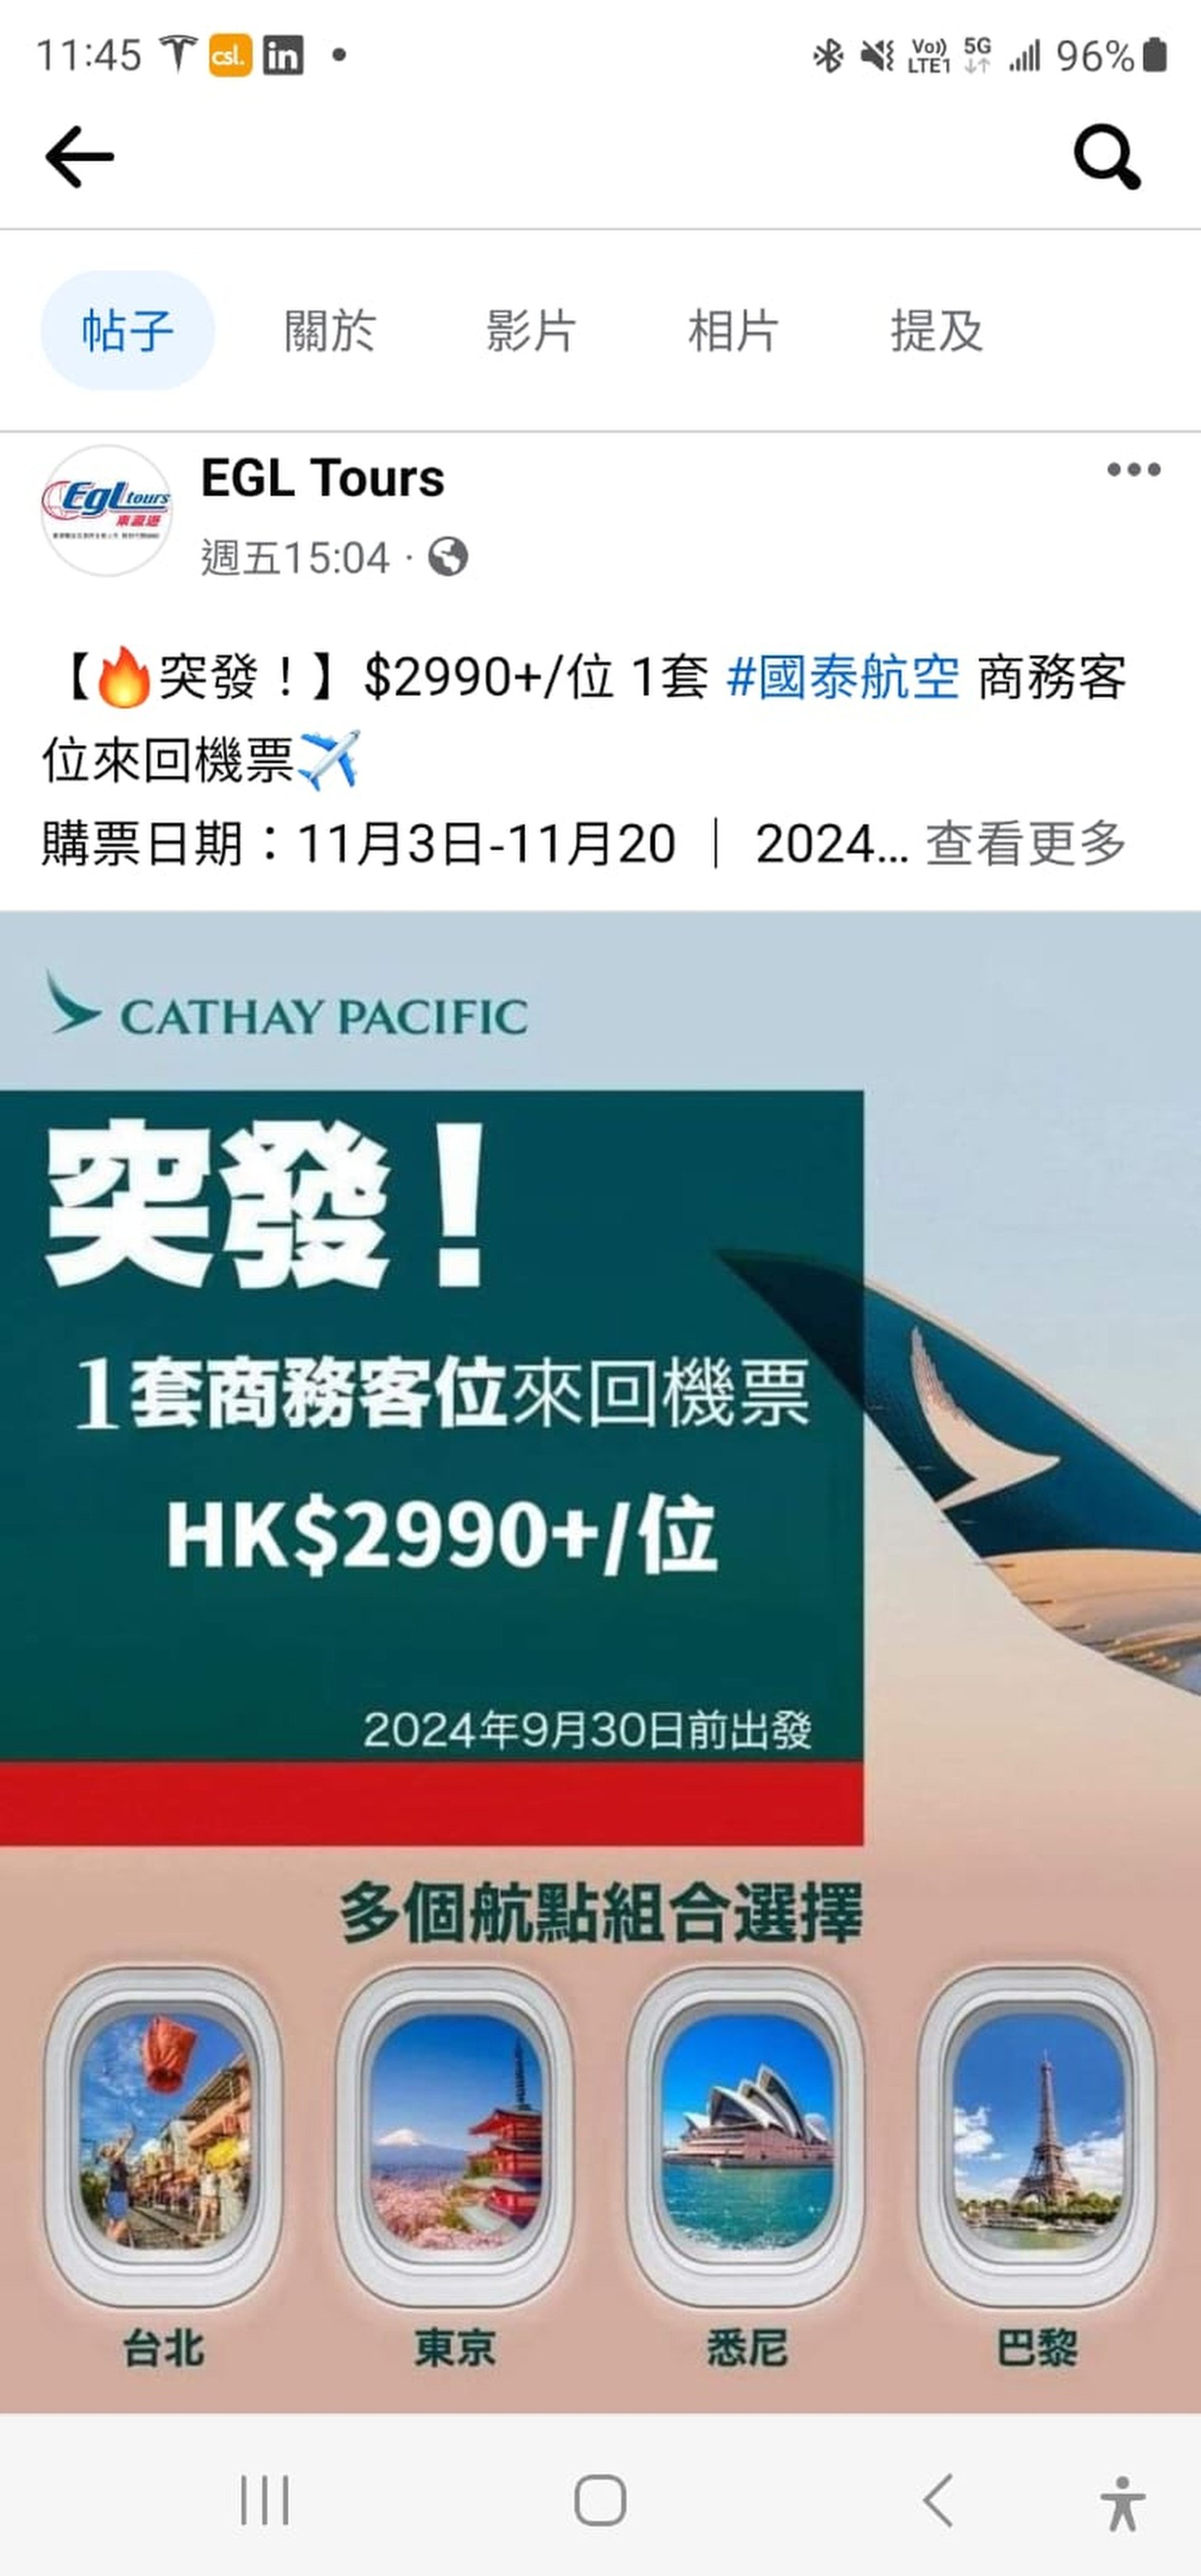 Hong Kong travel agents seek police assistance following a rise in counterfeit social media advertisements